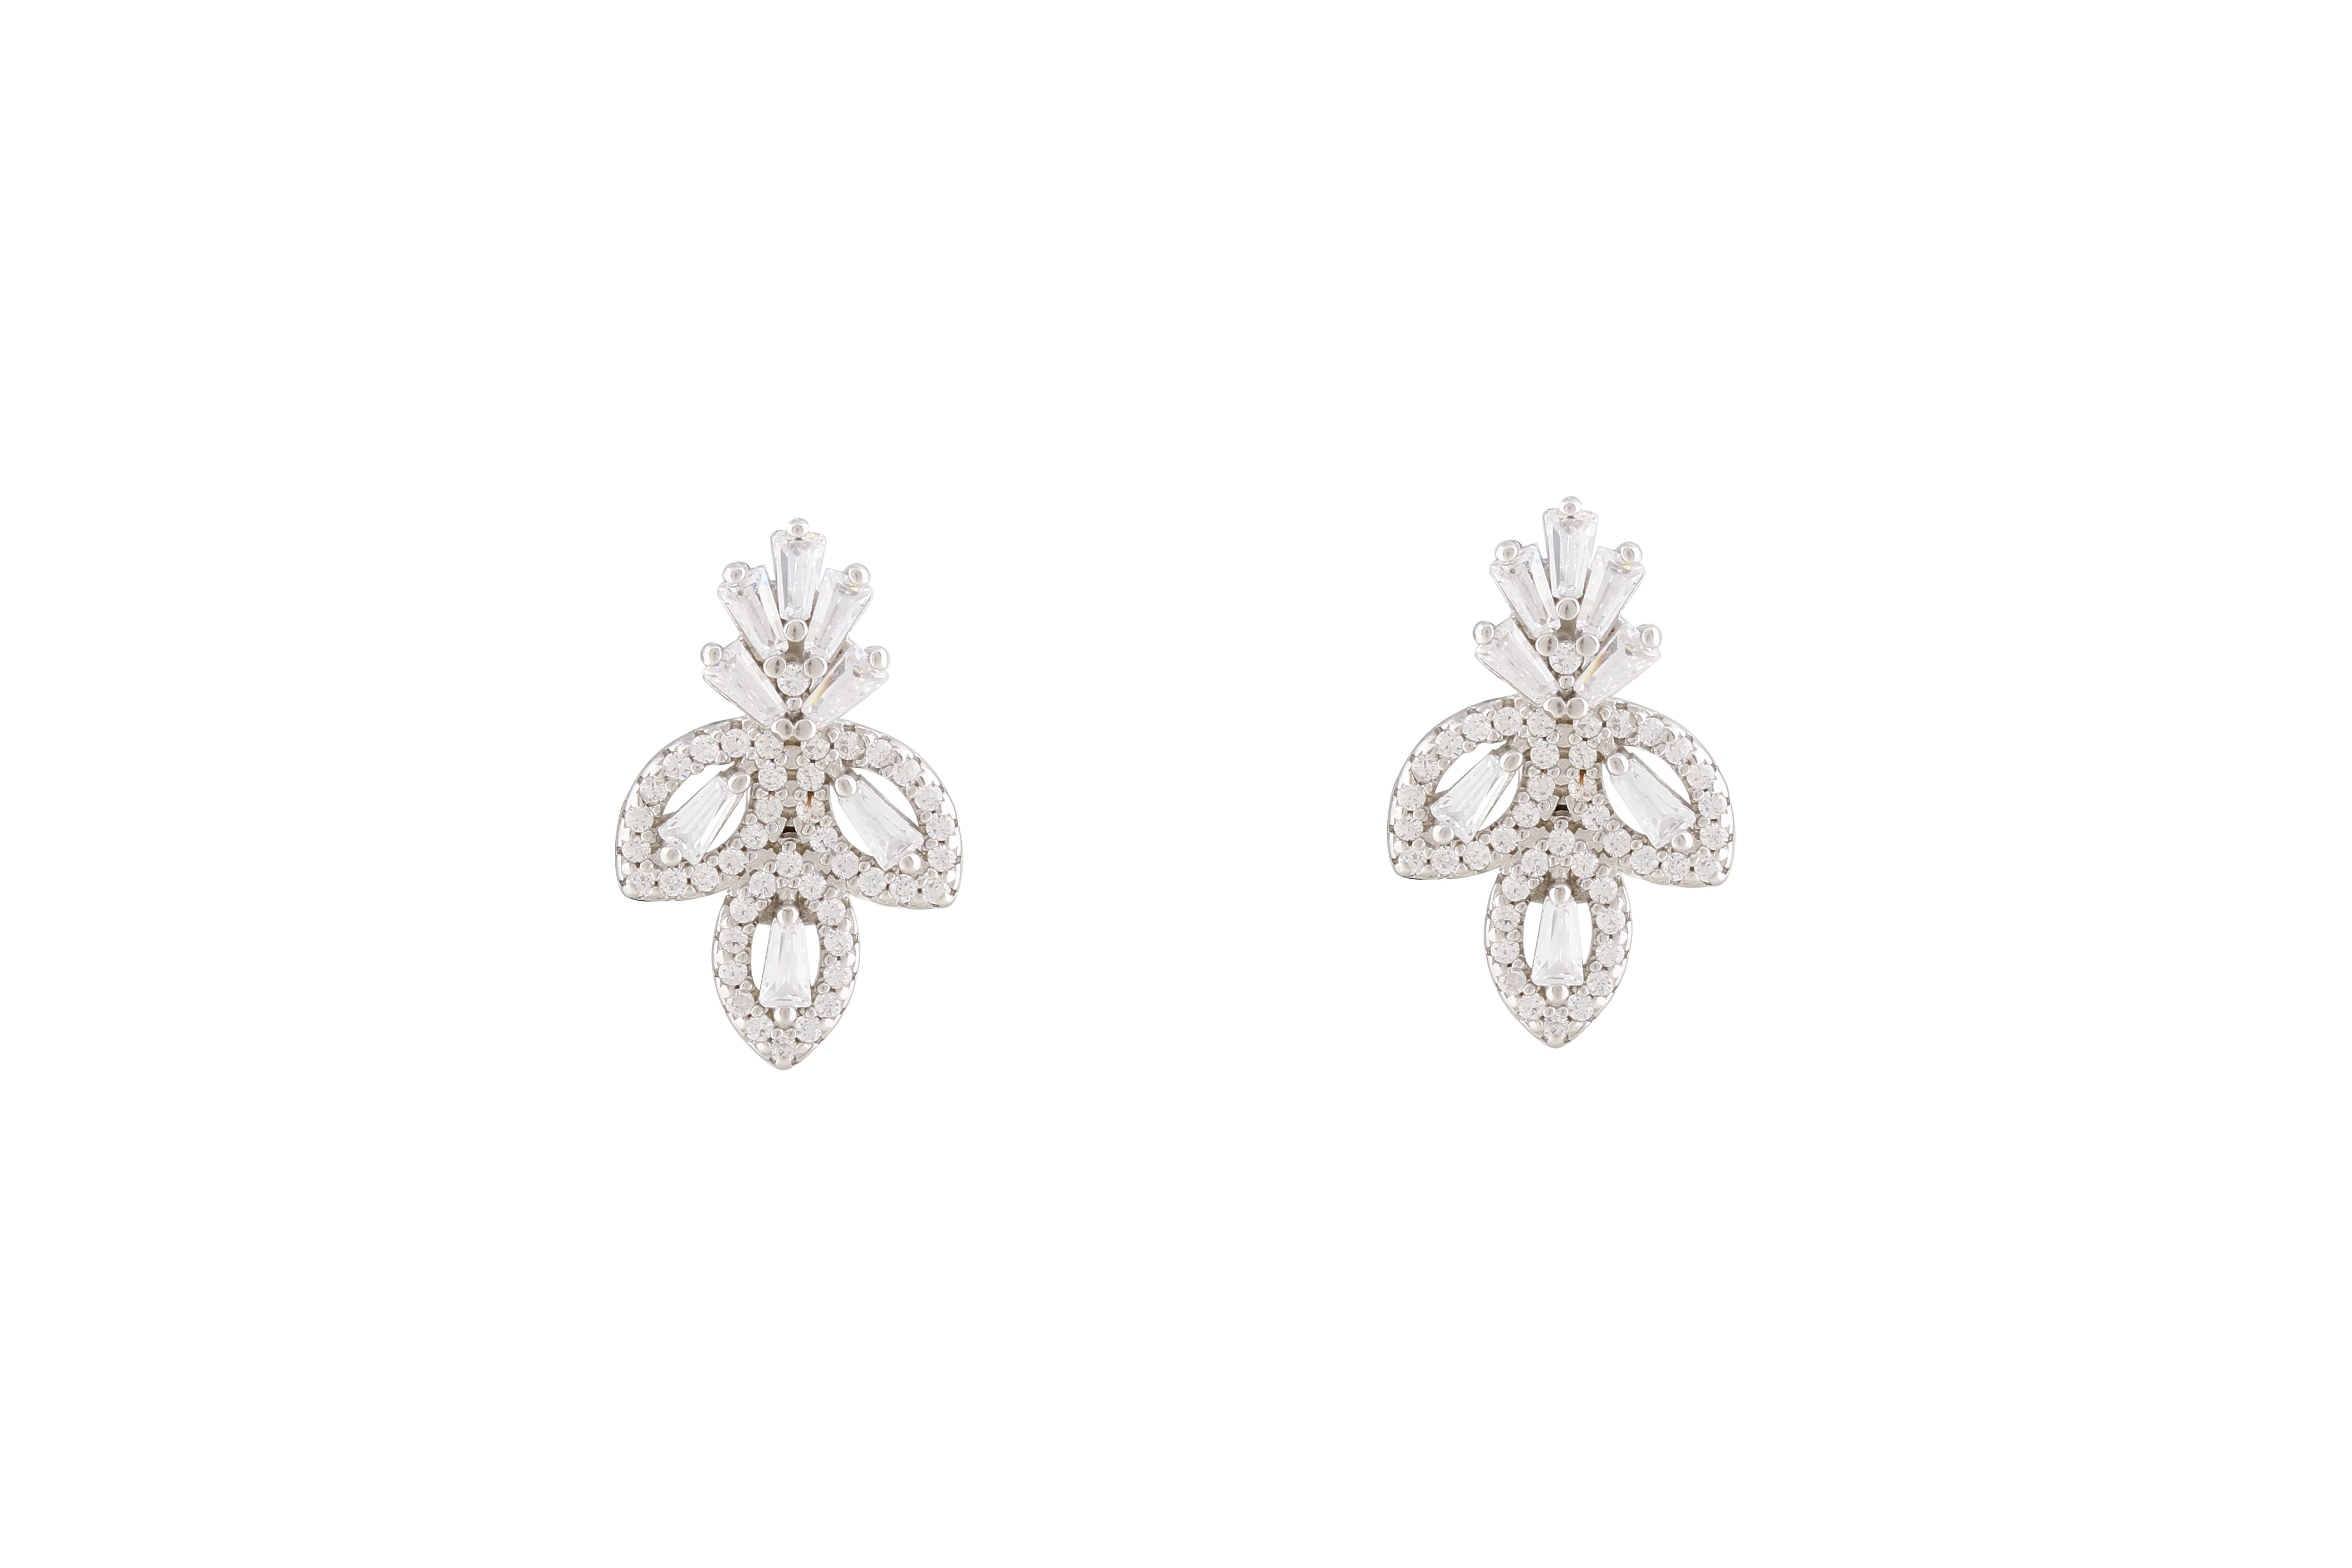 Asfour Crystal Clips Earrings With Art Deco Design In 925 Sterling Silver ER0434